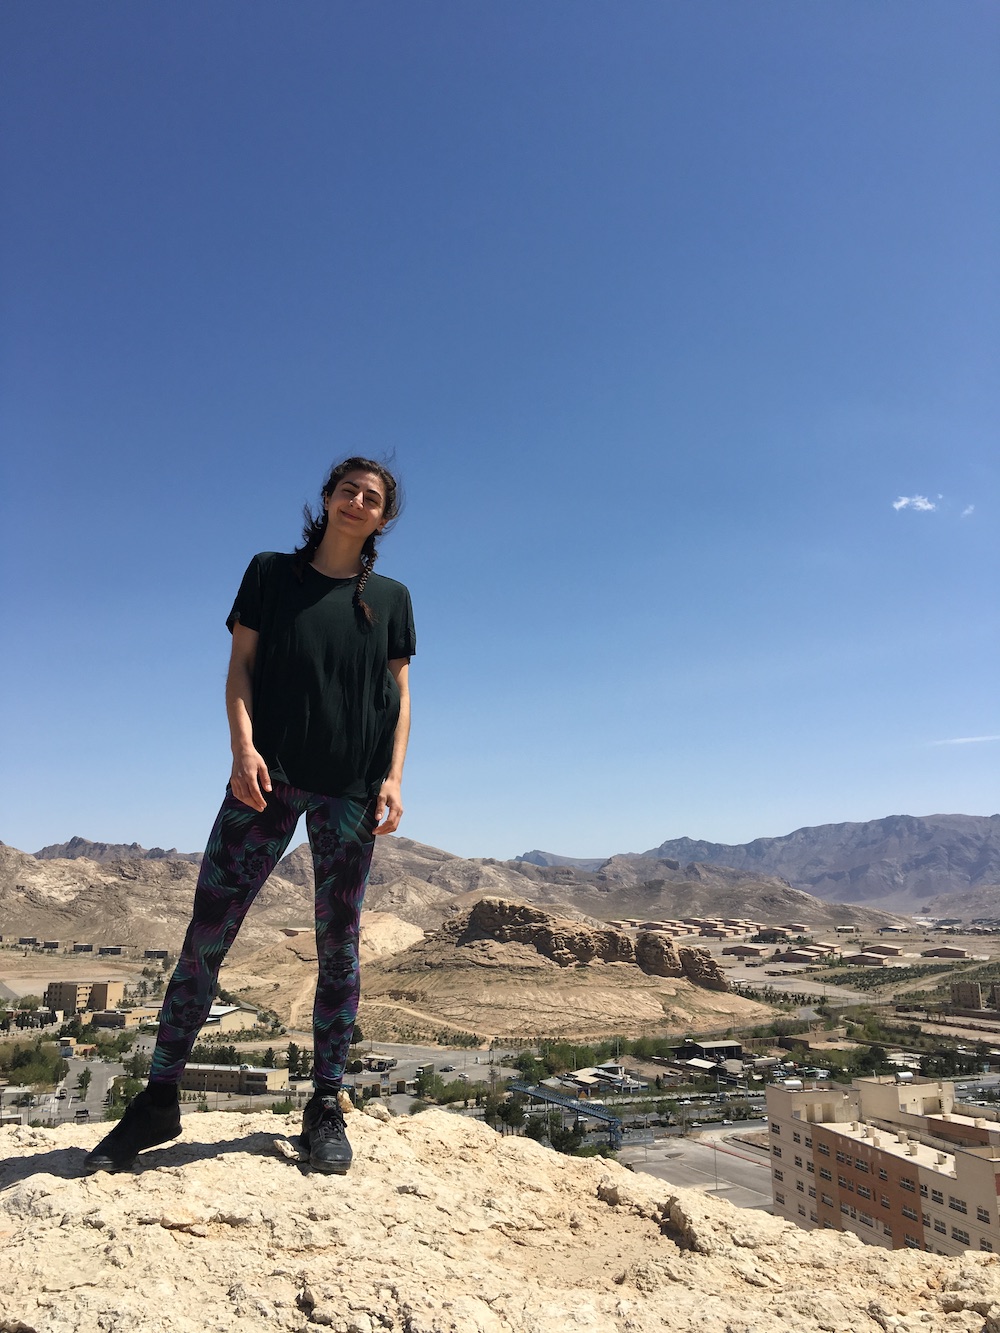 Portrait of the author standing on a rock outcropping with a city behind her